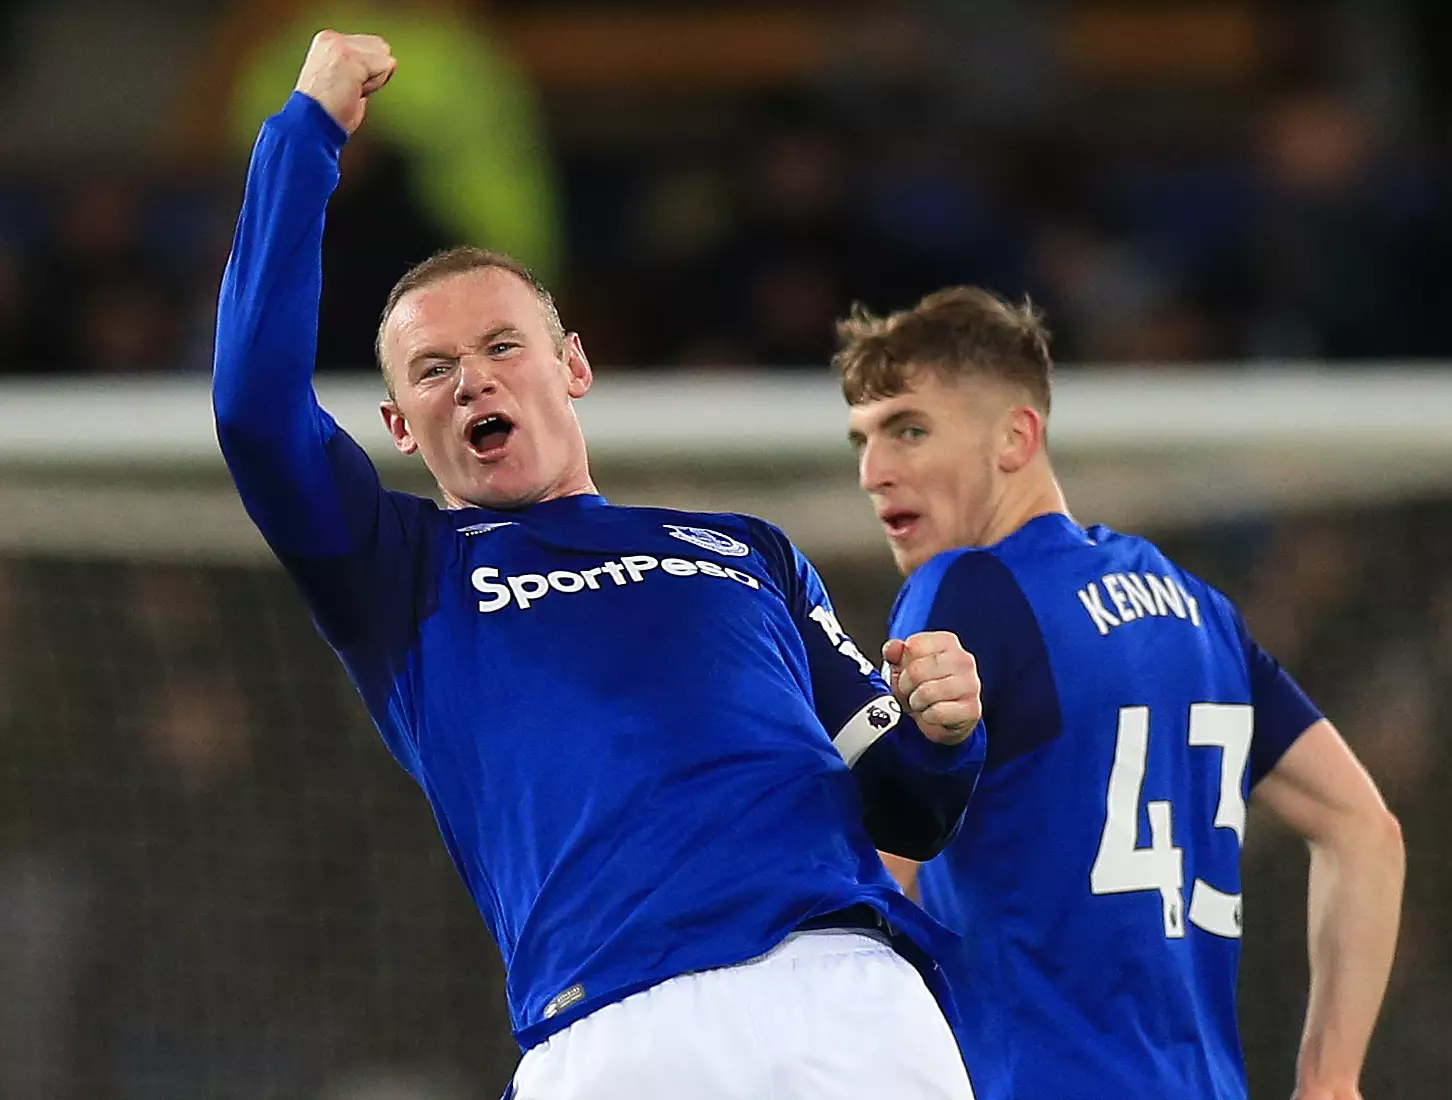 Rooney started the season well in an underperforming side but as they've improved his impact has waned. Image: PA Images